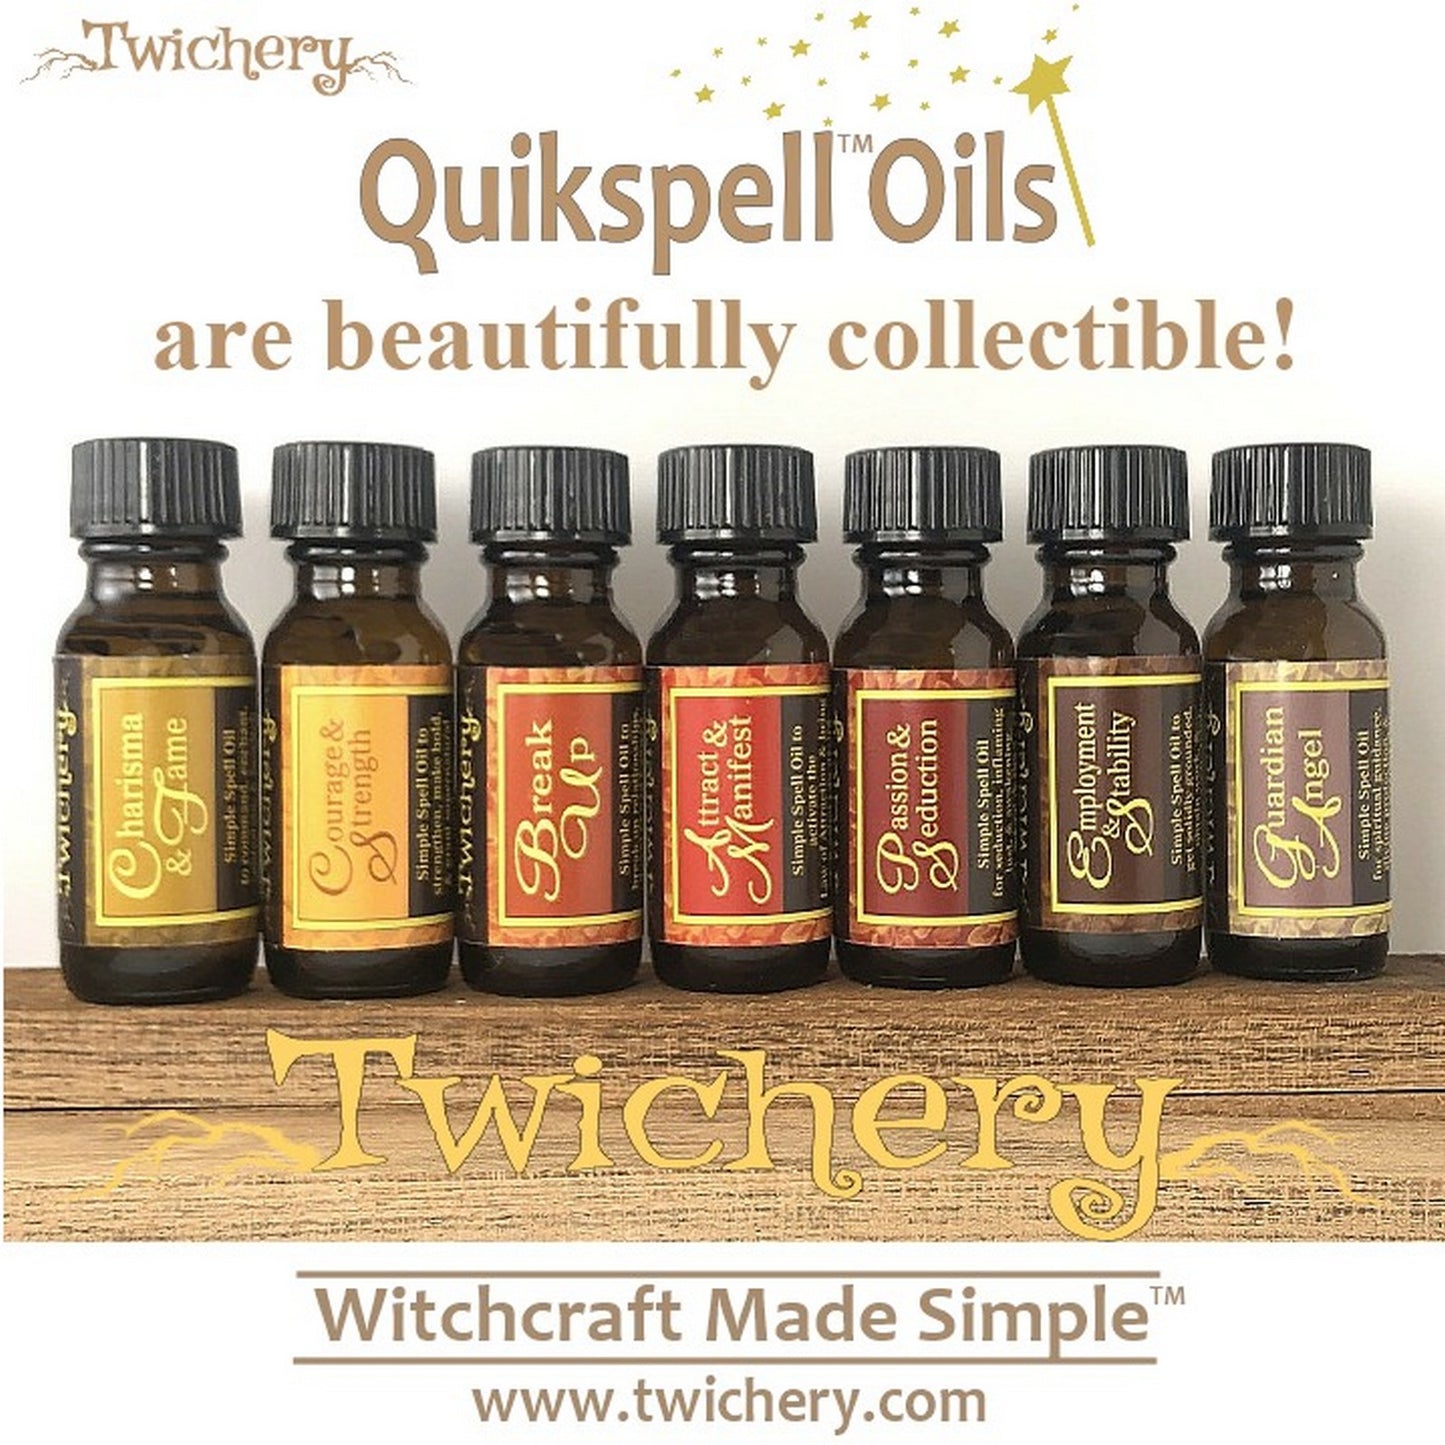 Collect all 24 Twichery Quikspell Oils for all your magickal needs, including major mojo boosting, courage and strength when you need it most!! Hoodoo, Voodoo, Wicca, Witchcraft Made Simple